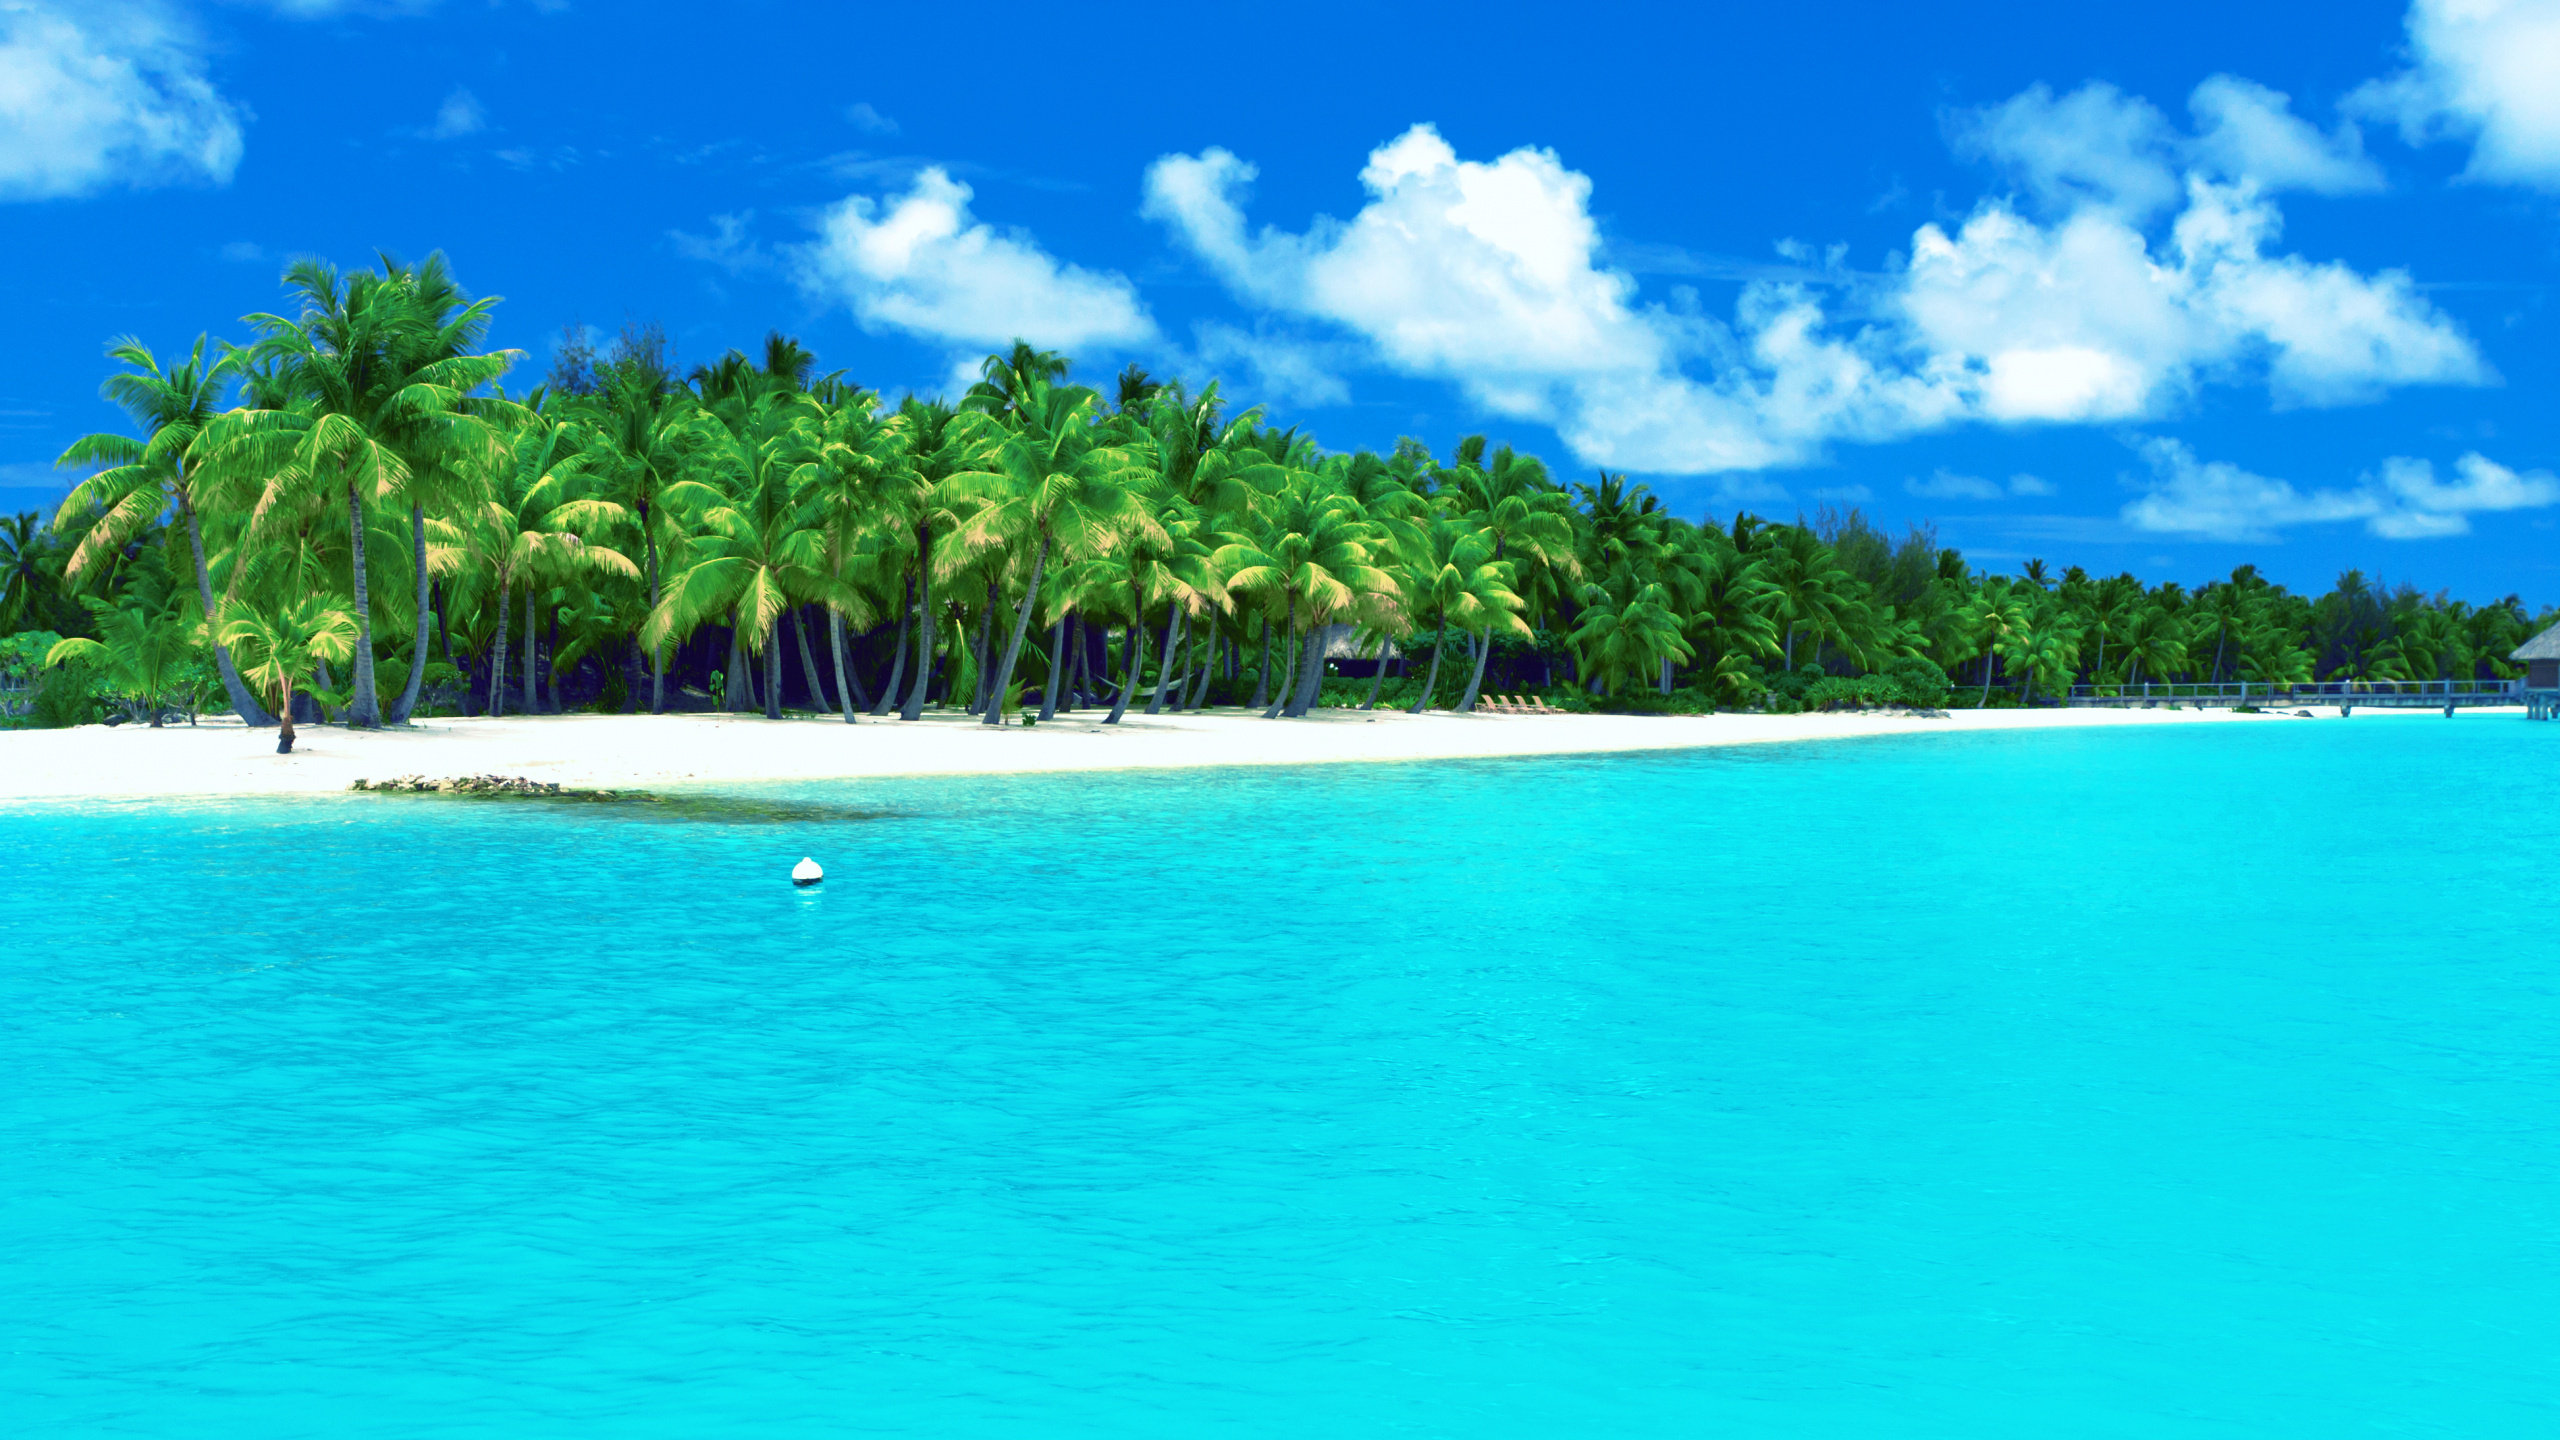 White Sand Beach With Palm Trees on The Side. Wallpaper in 2560x1440 Resolution